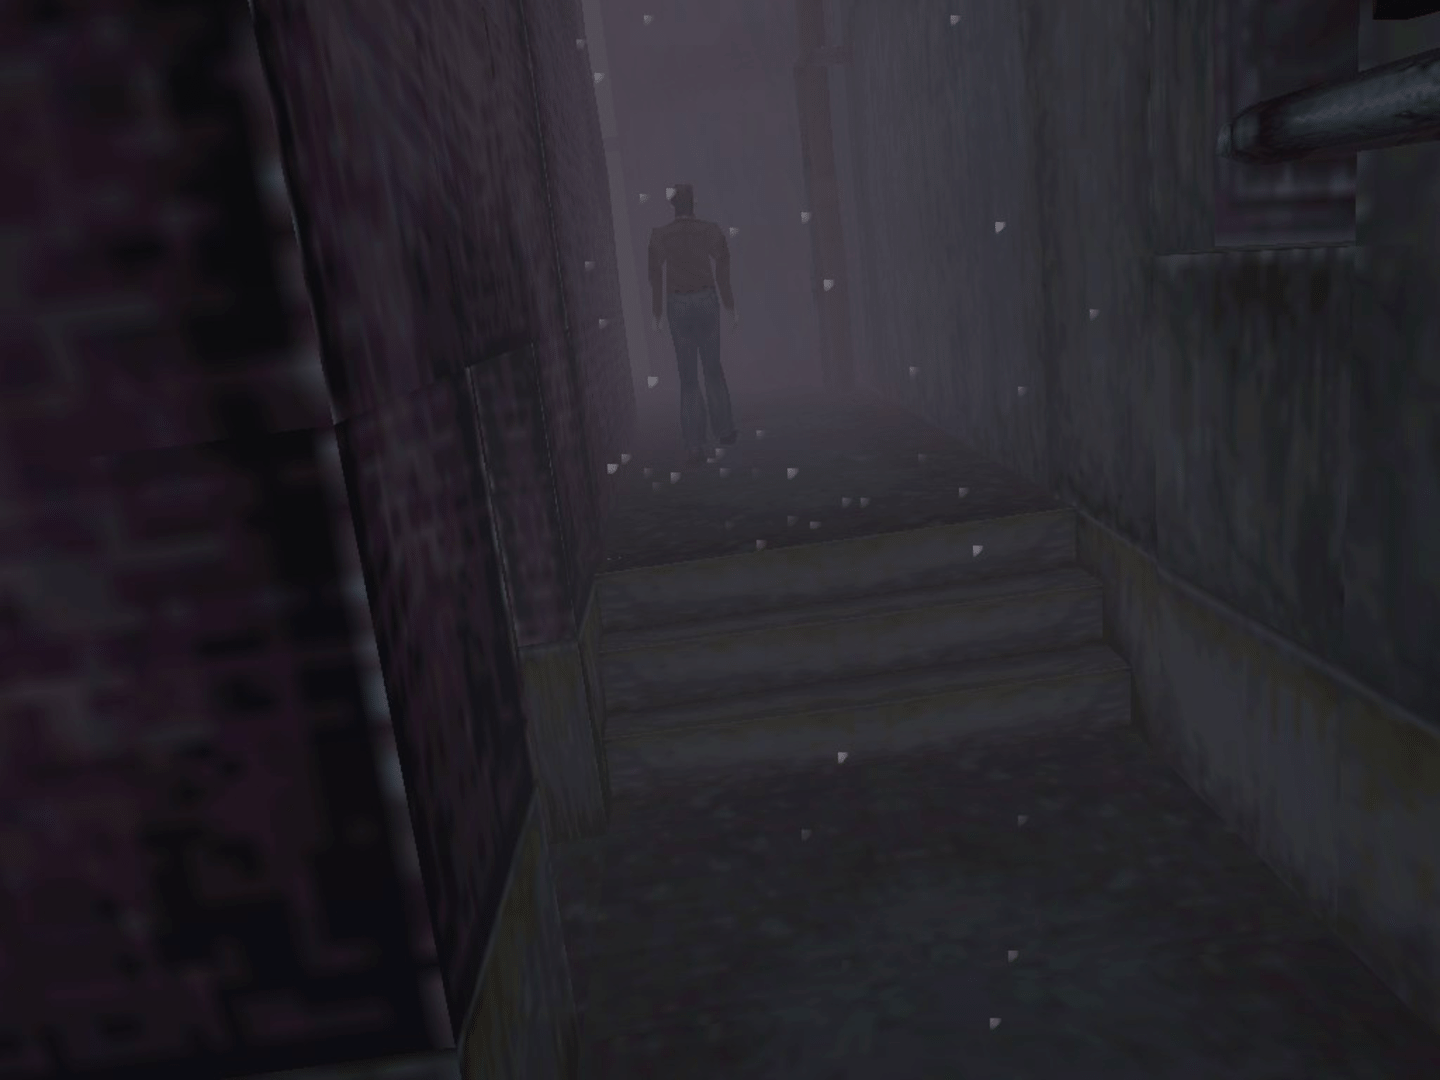 silent hill 1 game